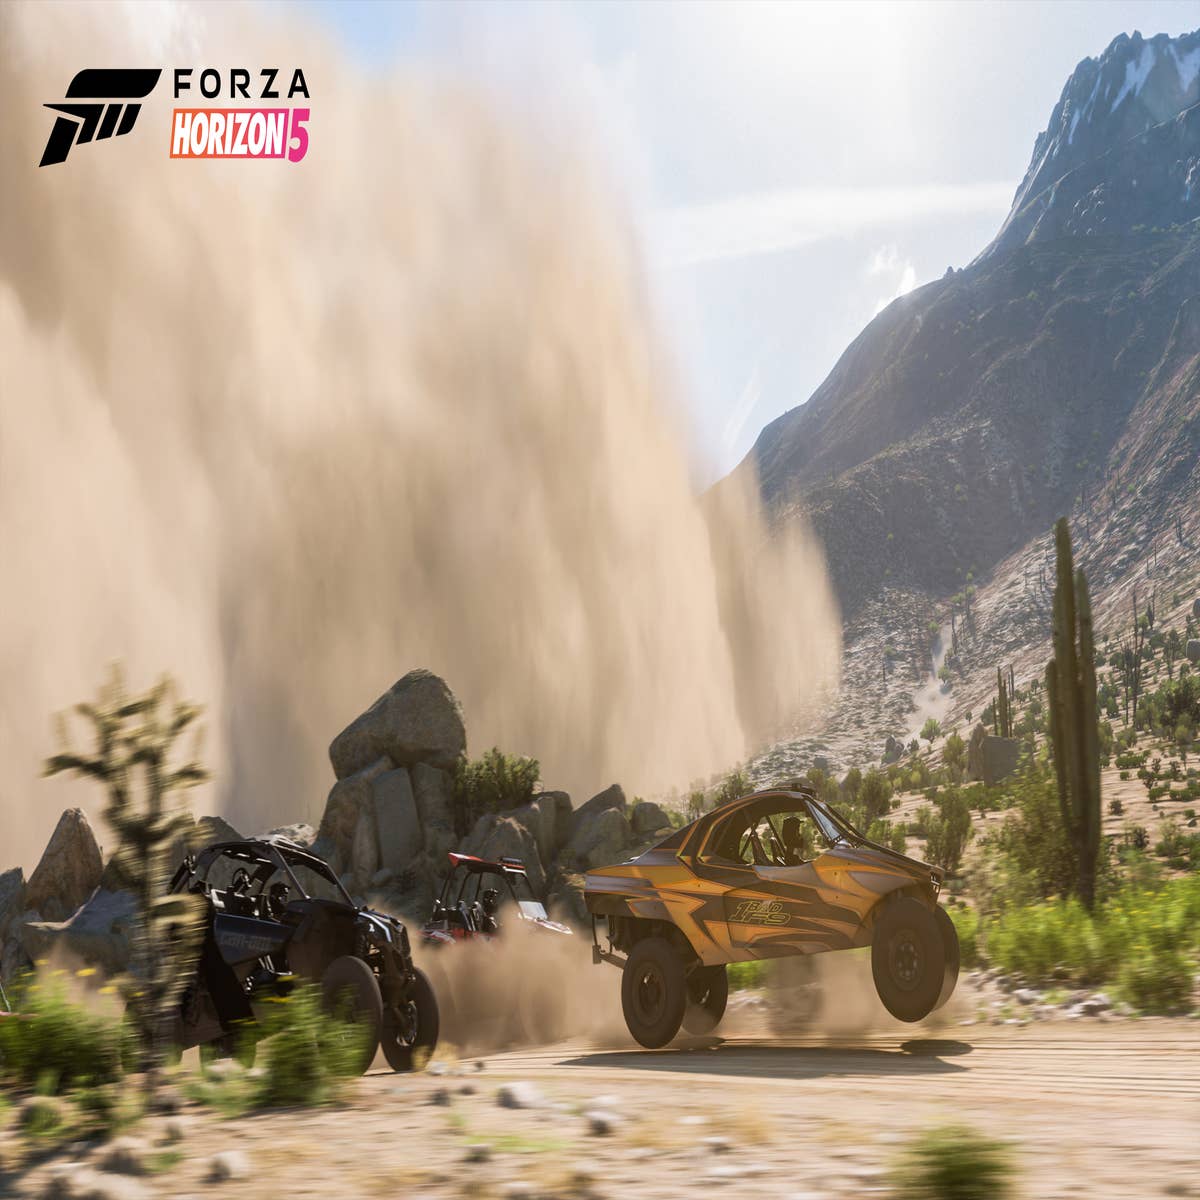 Forza Horizon 5 is IGN's GOTY 2021 (4 Awards in total) - Gaming